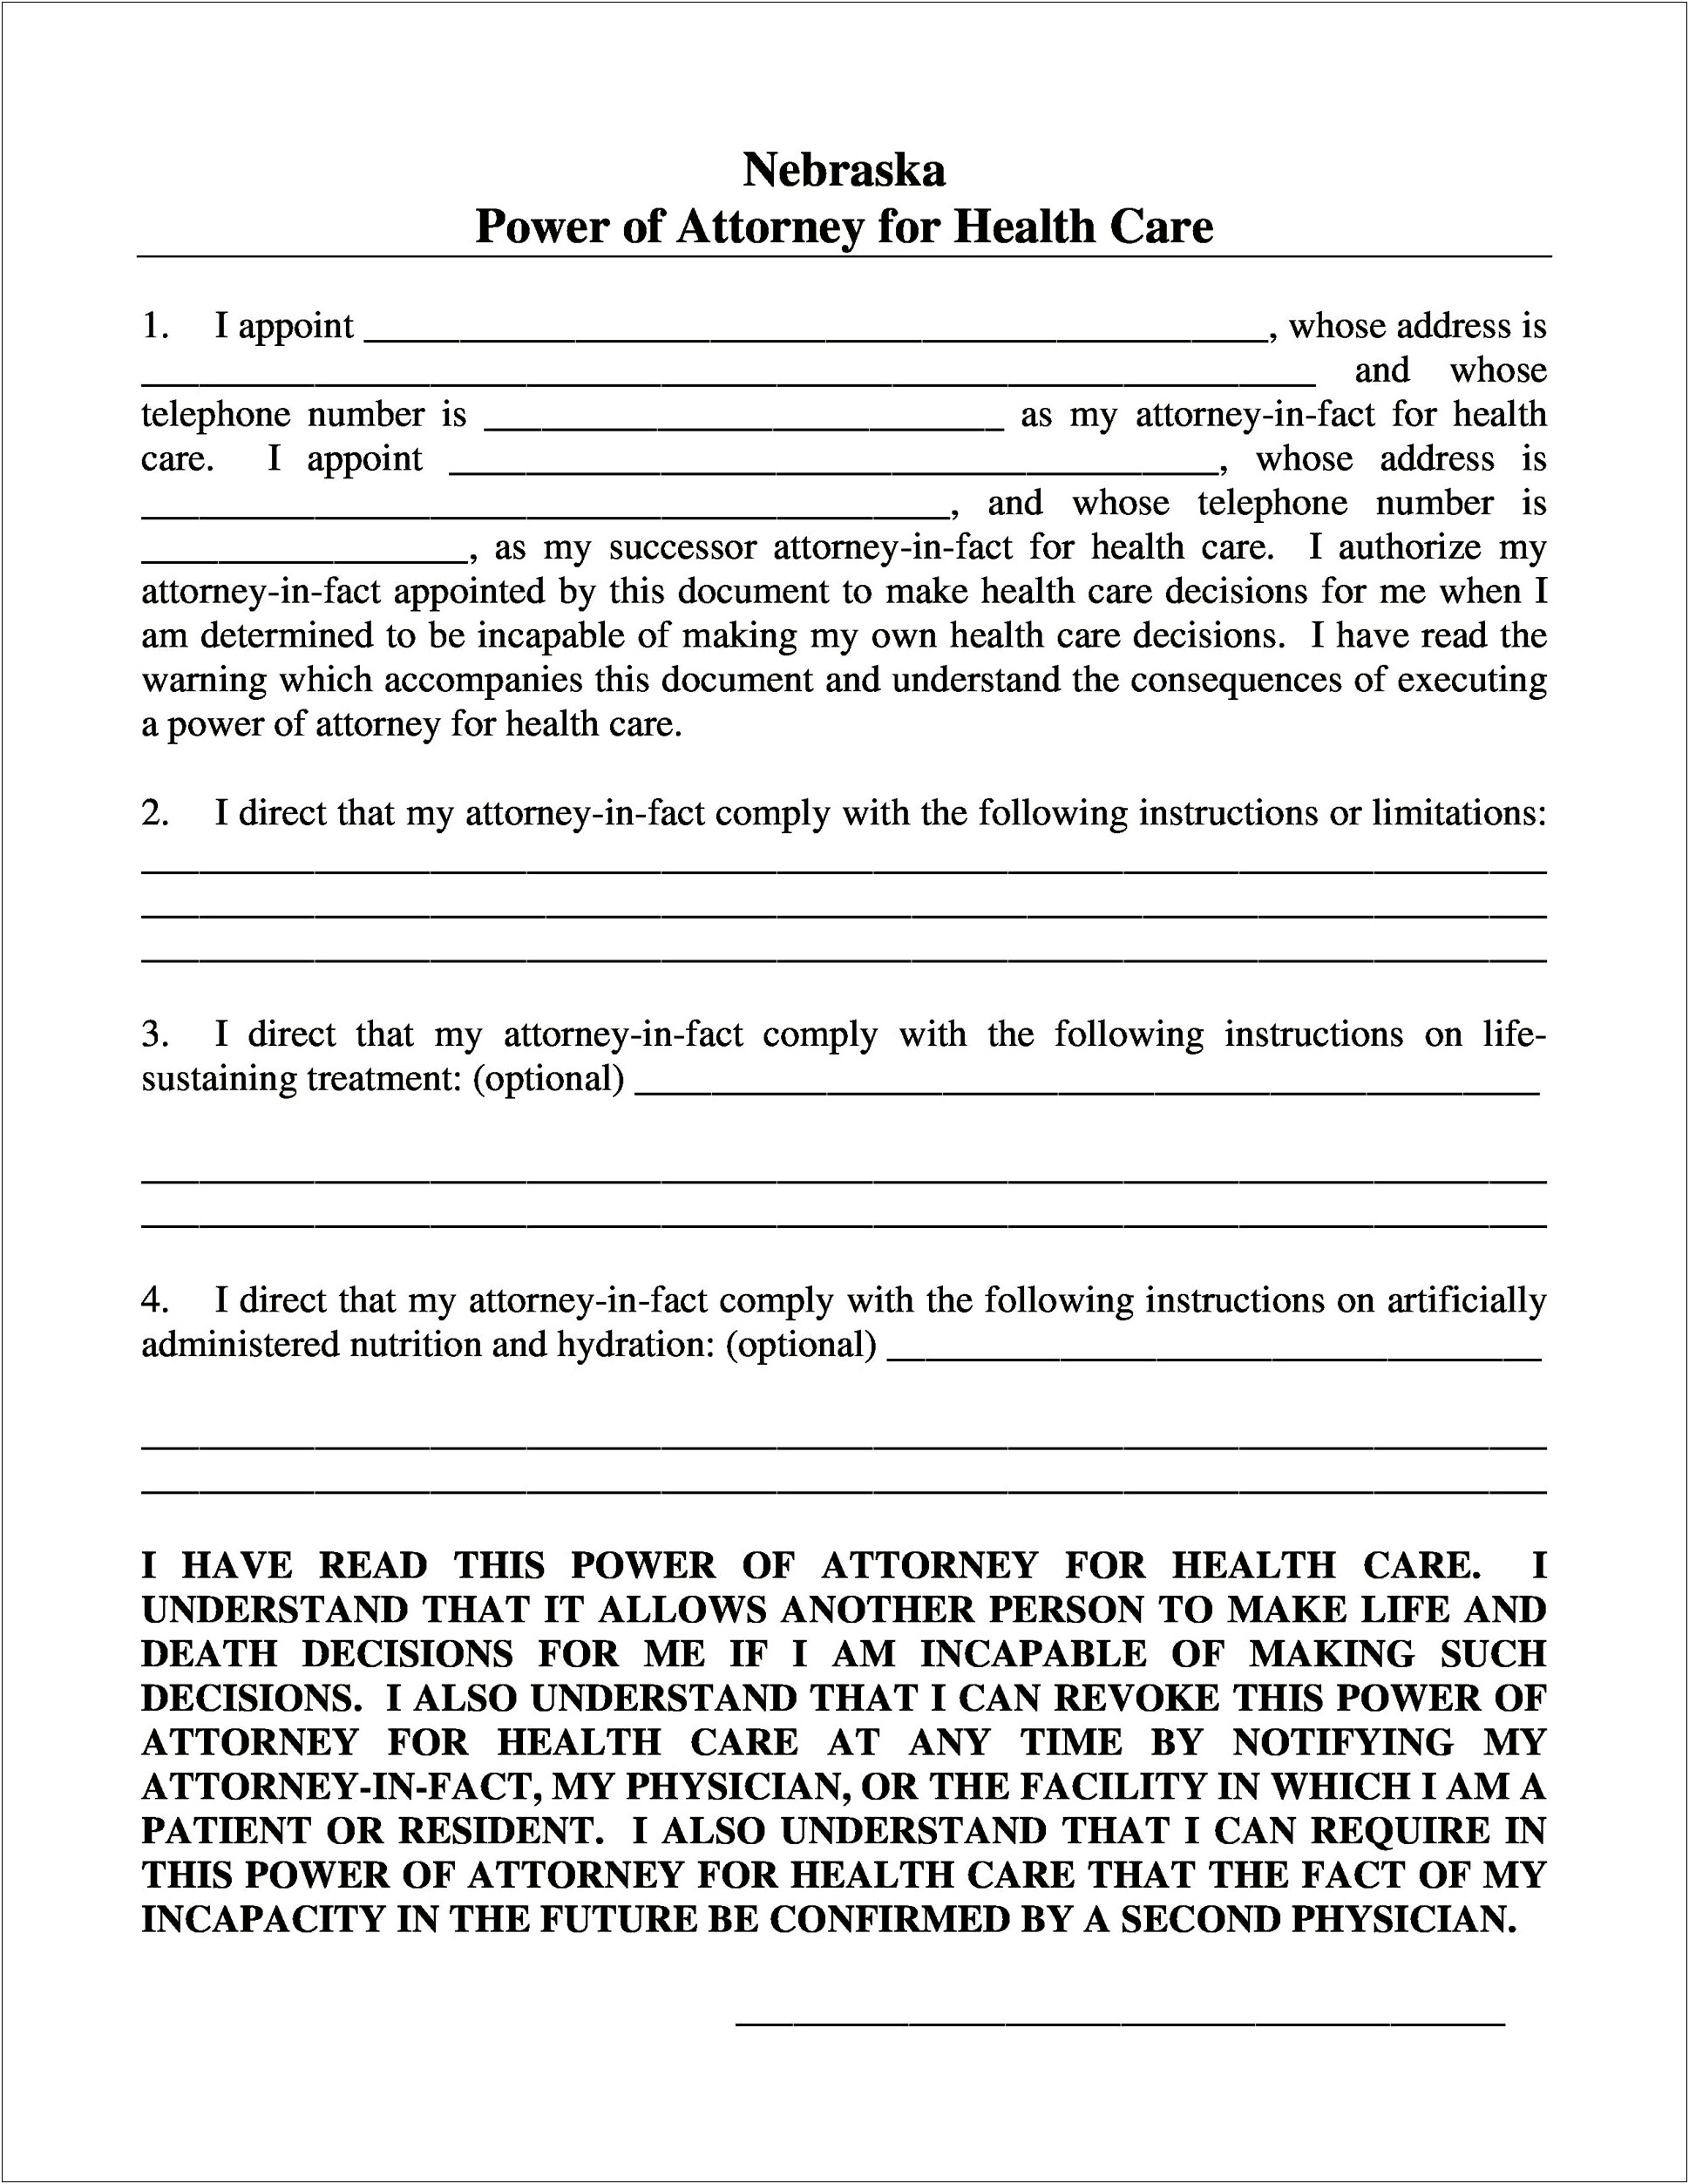 Free General Power Of Attorney Template Download